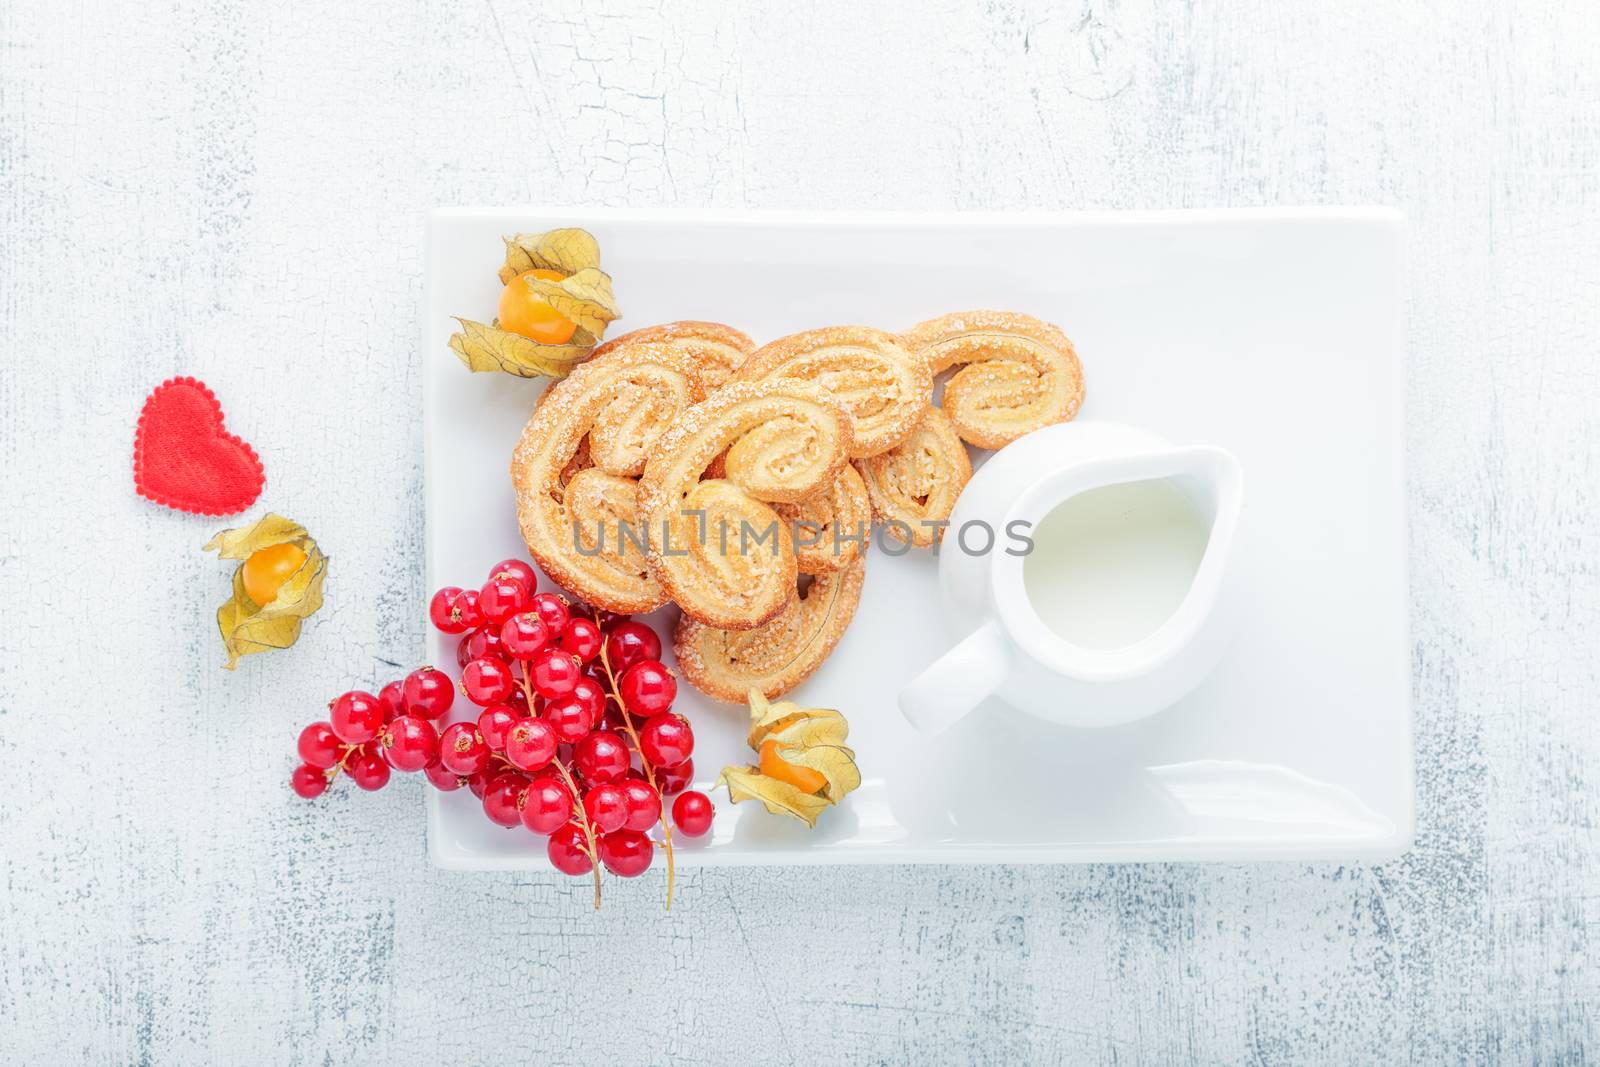 Heart-shaped biscuits wiith sugar and cinnamon  by supercat67